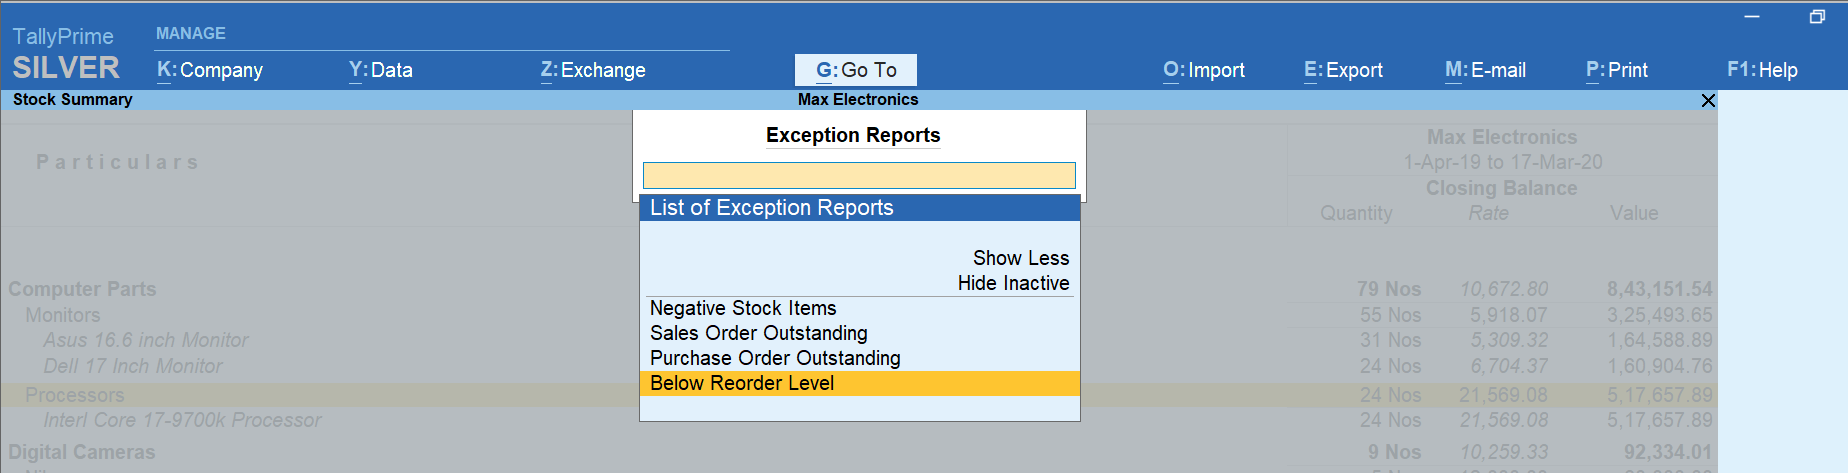 Exception Reports in TallyPrime